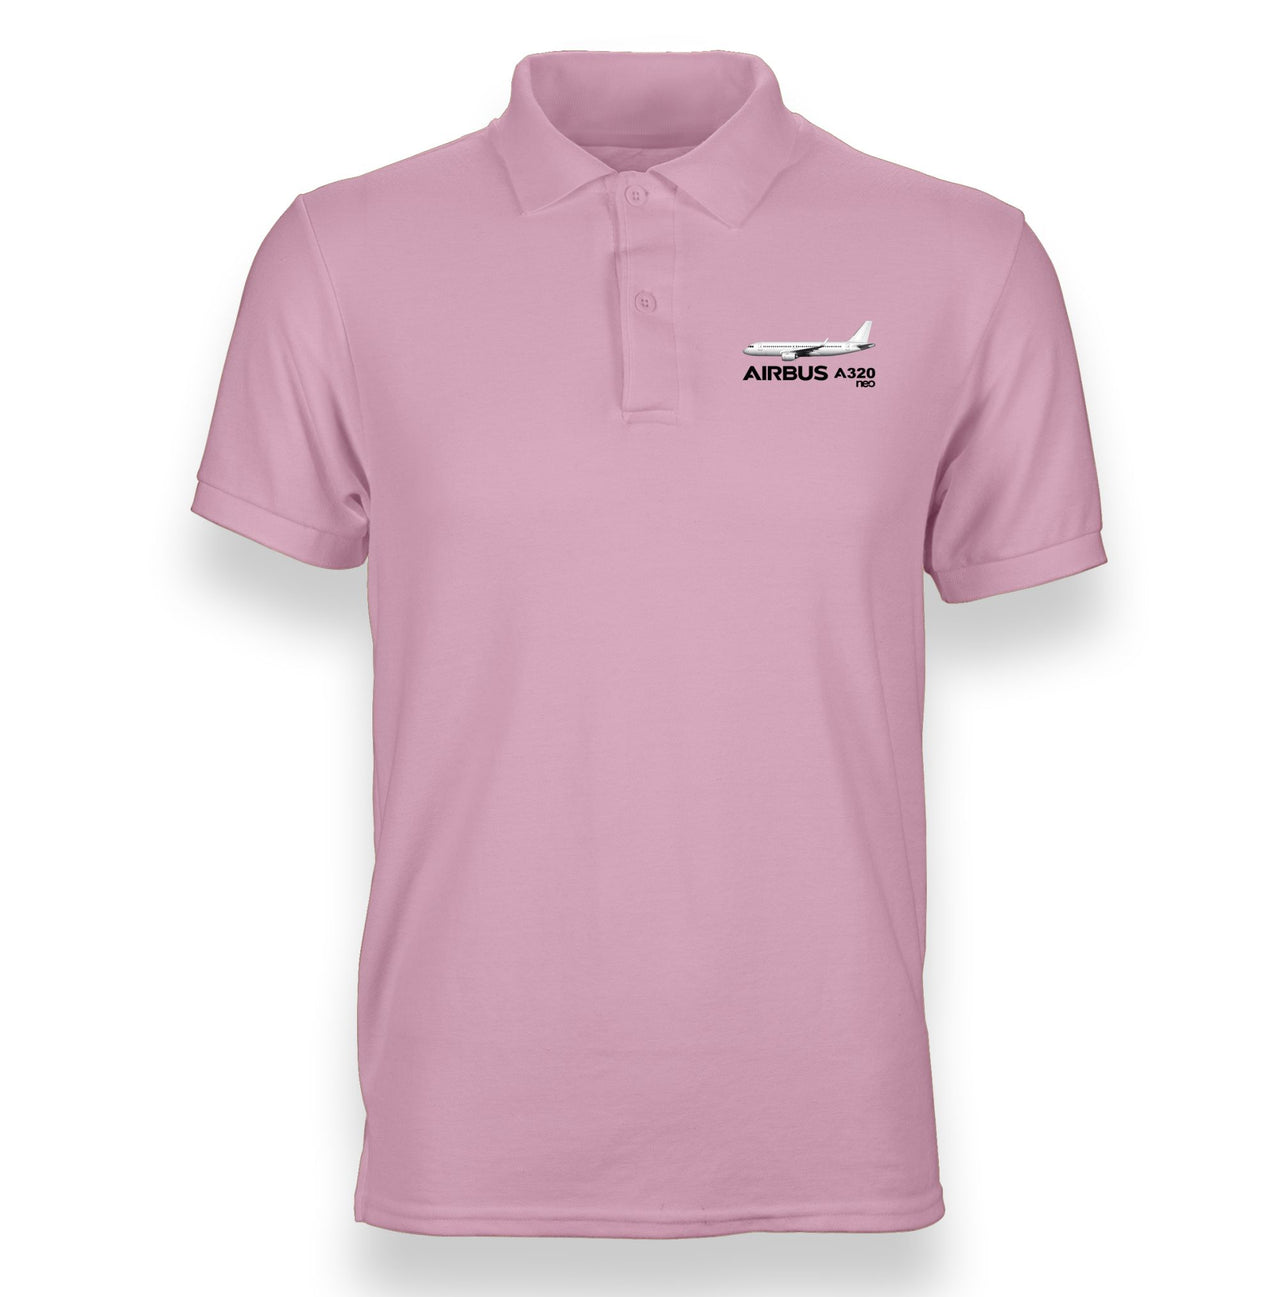 The Airbus A320Neo Designed "WOMEN" Polo T-Shirts